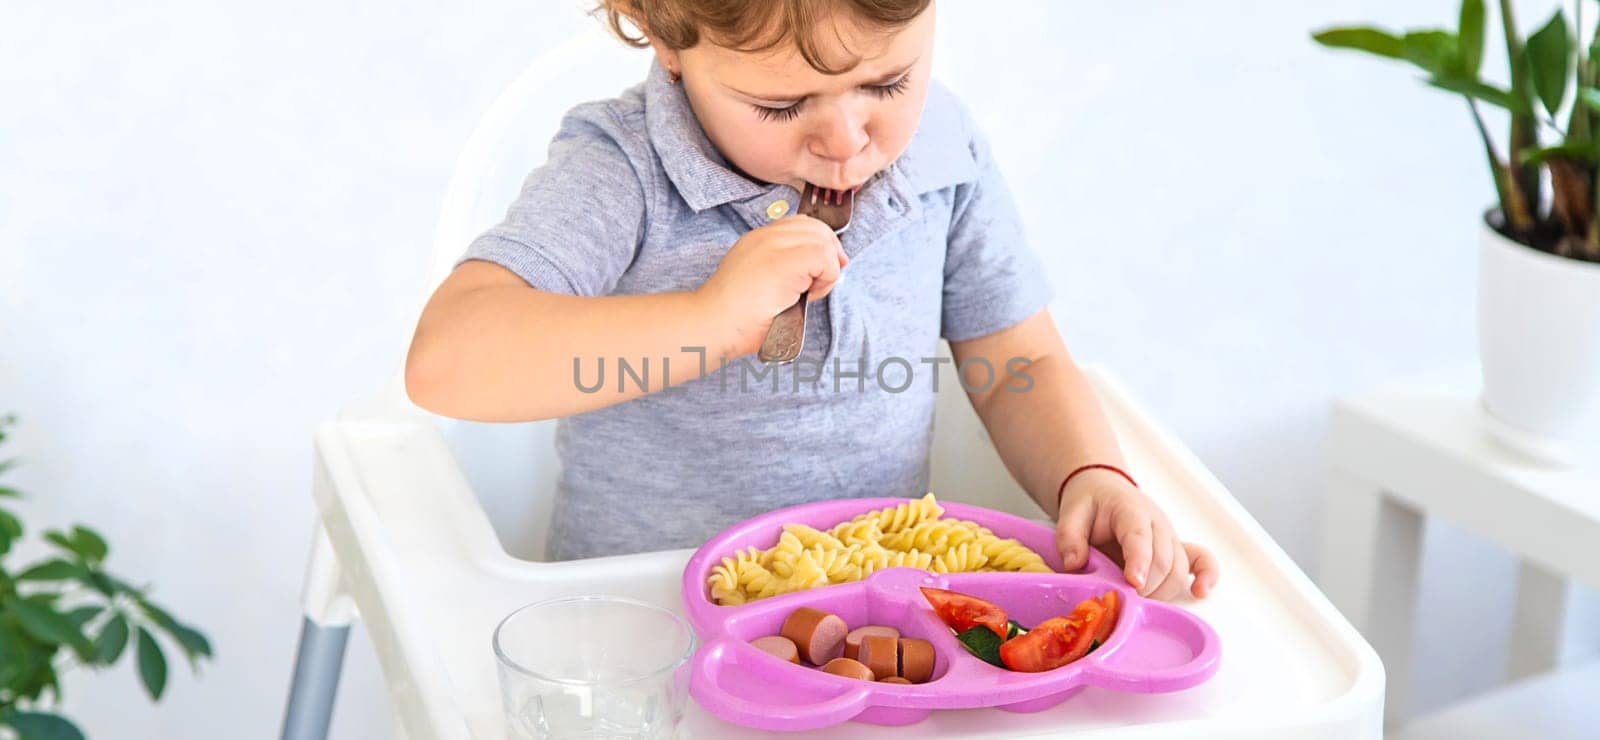 The child eats pasta and vegetables. Selective focus. Kid.